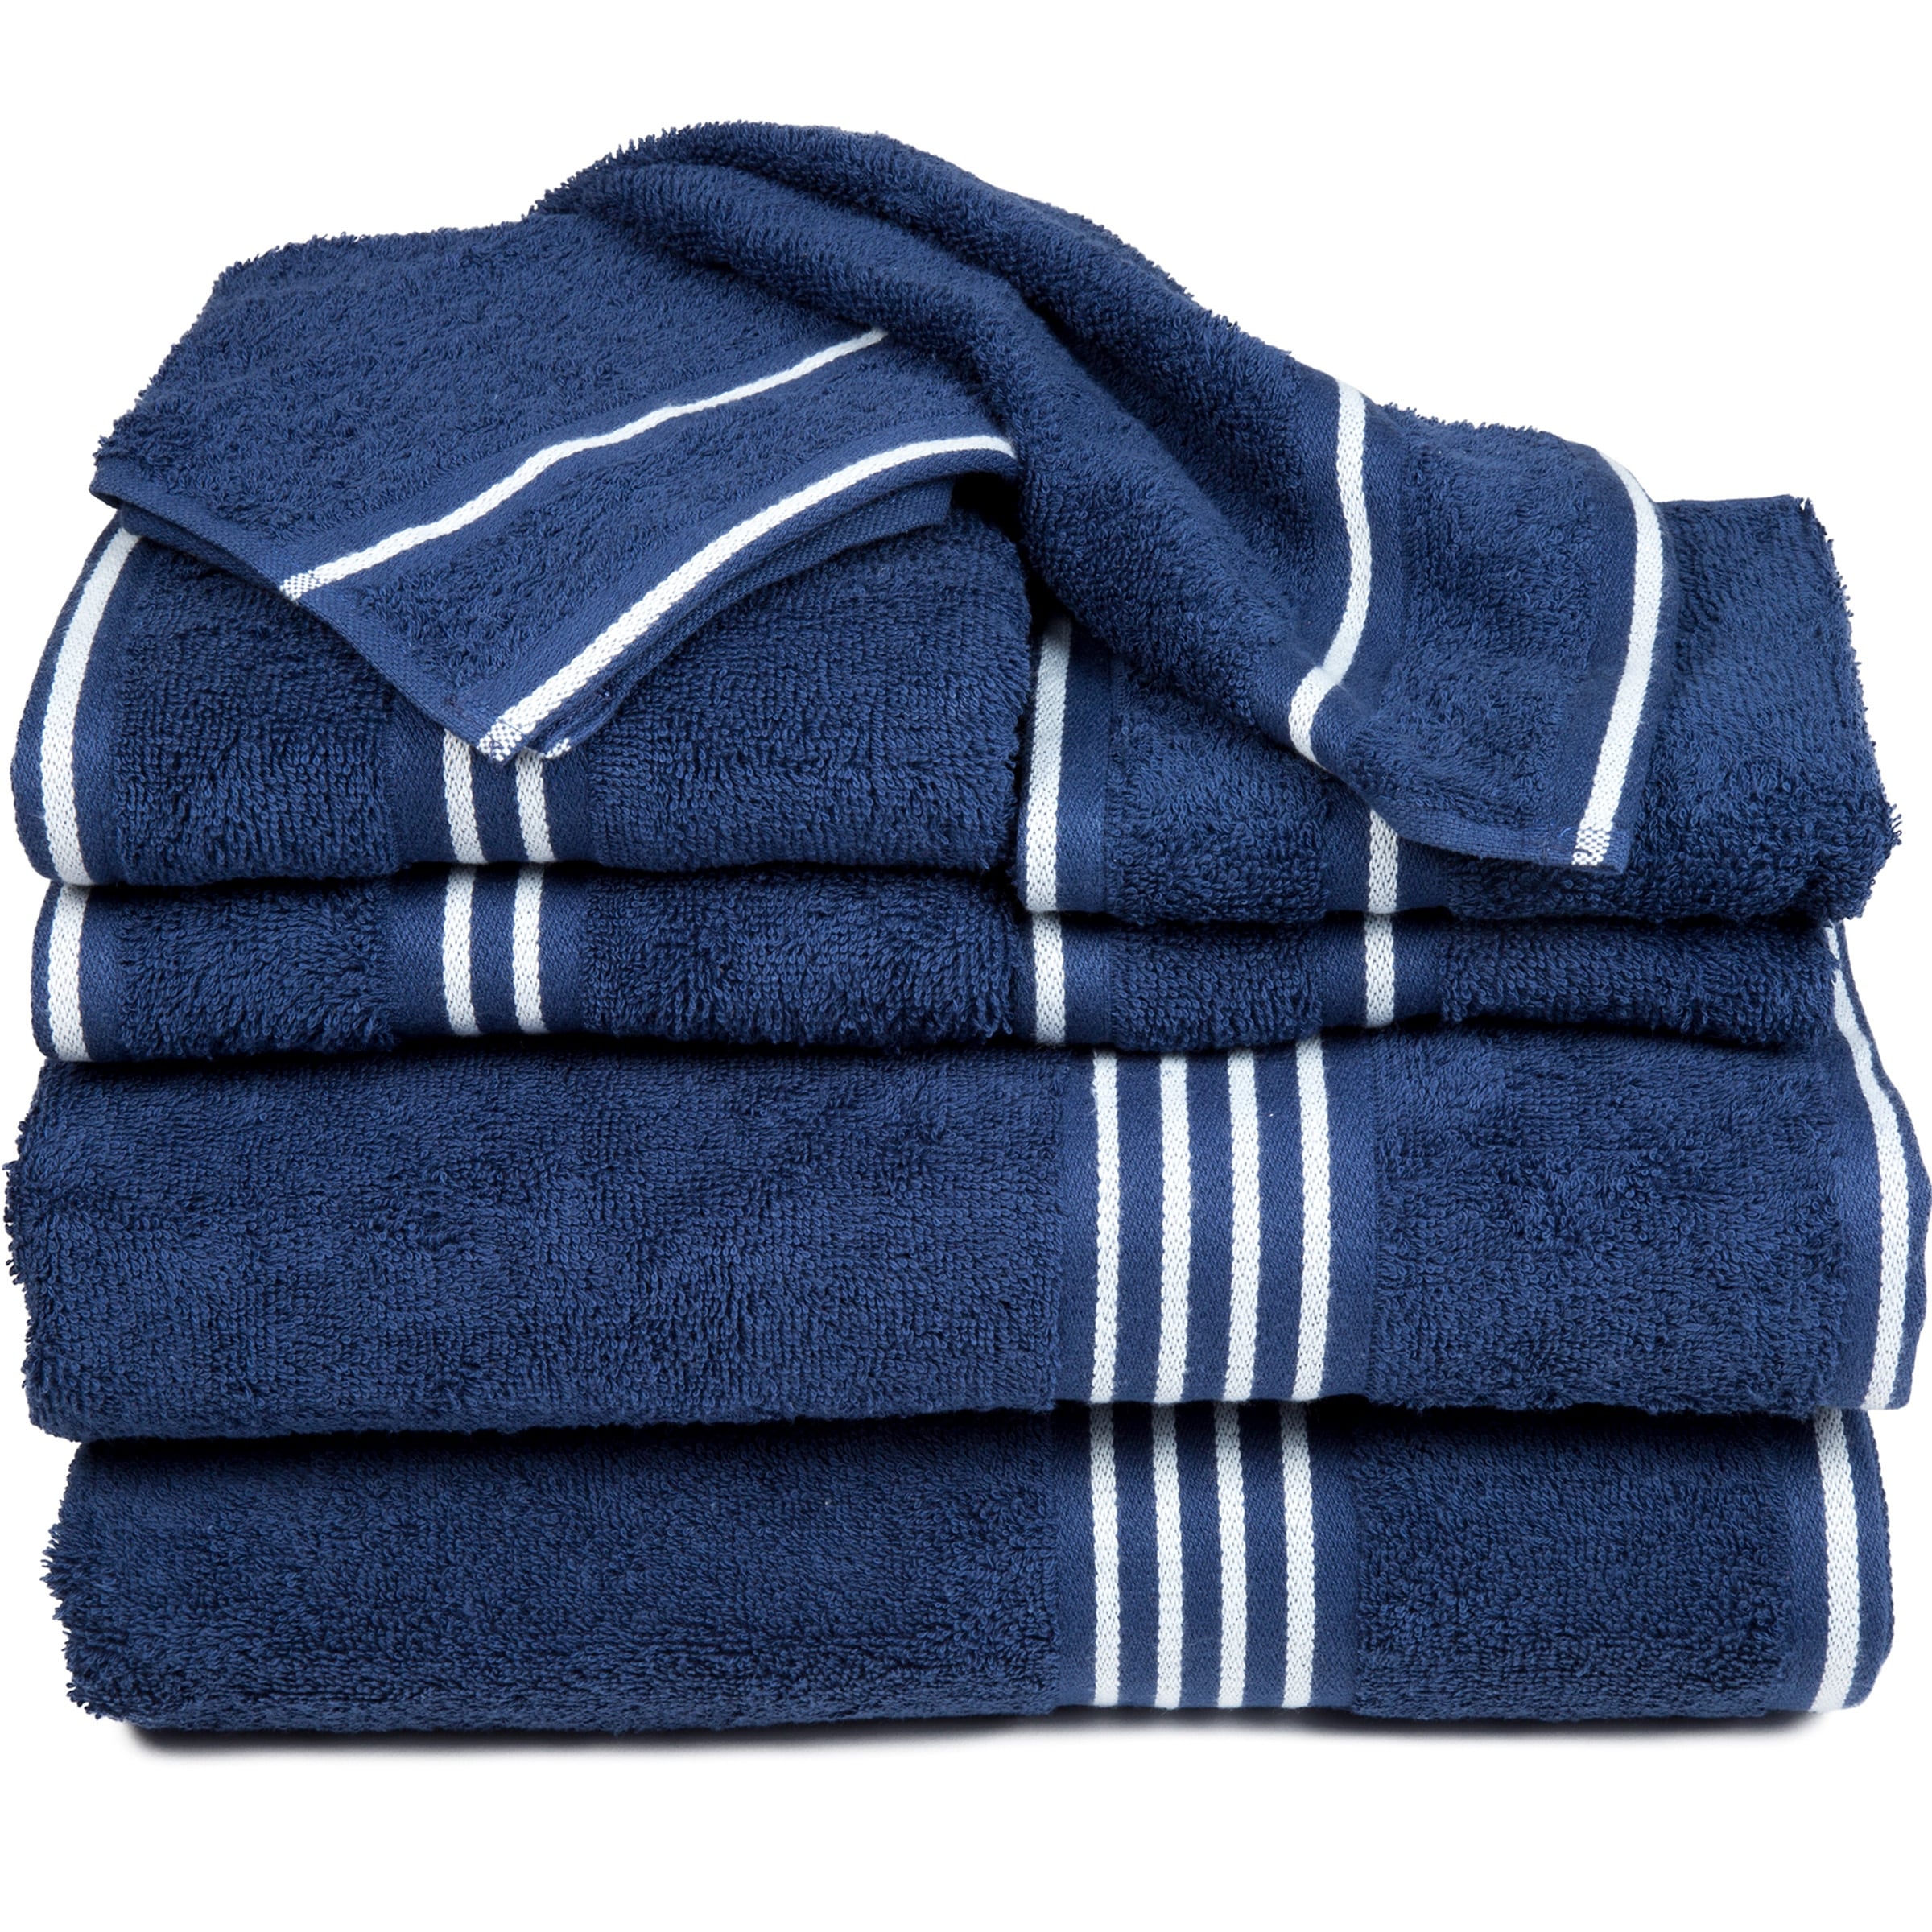 https://ak1.ostkcdn.com/images/products/is/images/direct/8aef704936dc89d64d1b5fee89f4919764a0e990/Towel-Set---Cotton-Bathroom-Accessories-with-Bath-Towels%2C-Hand-Towels%2C-Washcloths%2C-and-Fingertip-Towels-by-Lavish-Home-%28Navy%29.jpg